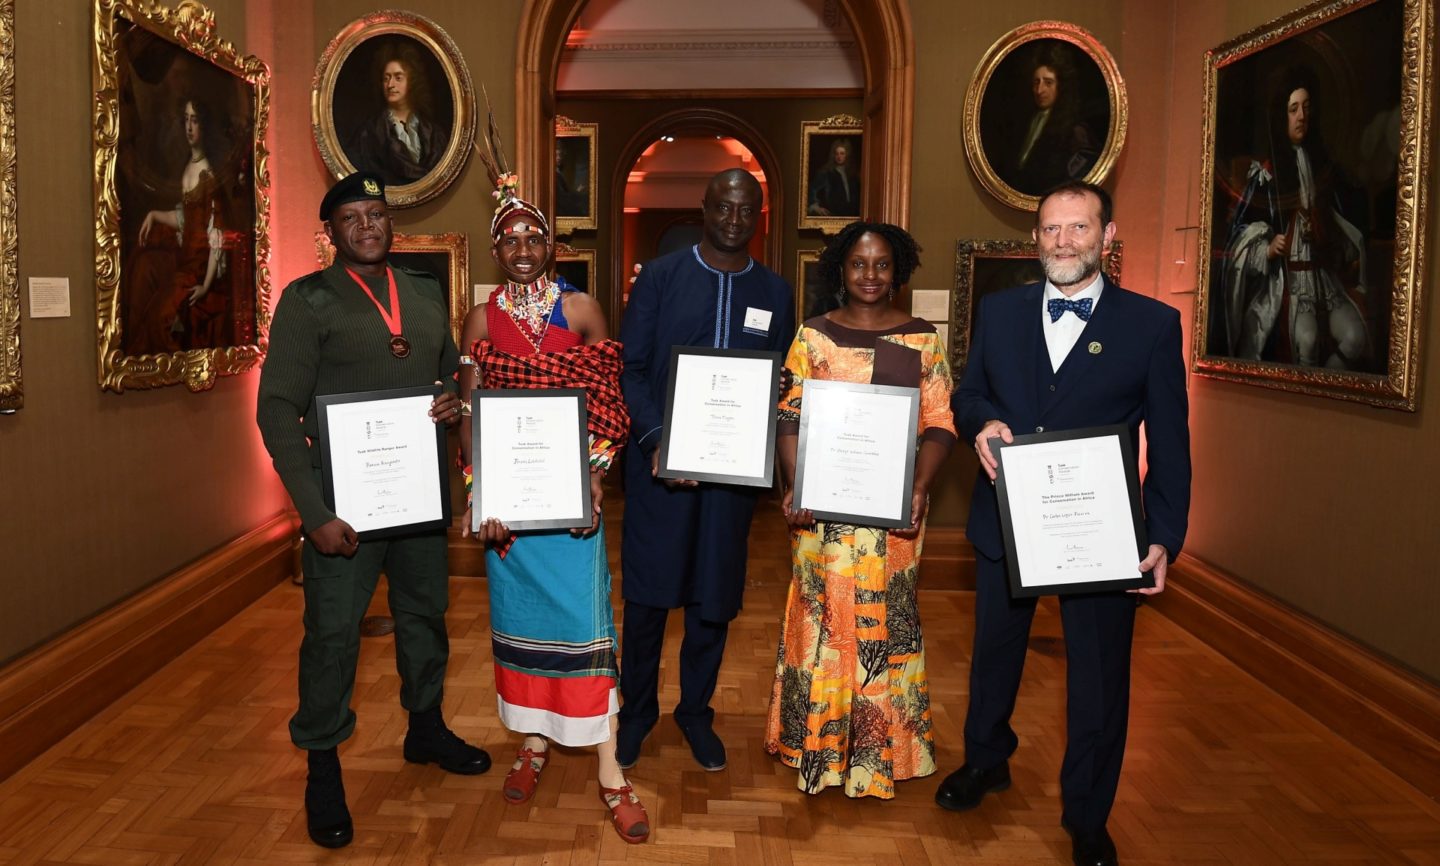 Tusk Conservation Awards 2019 Winners & Finalists